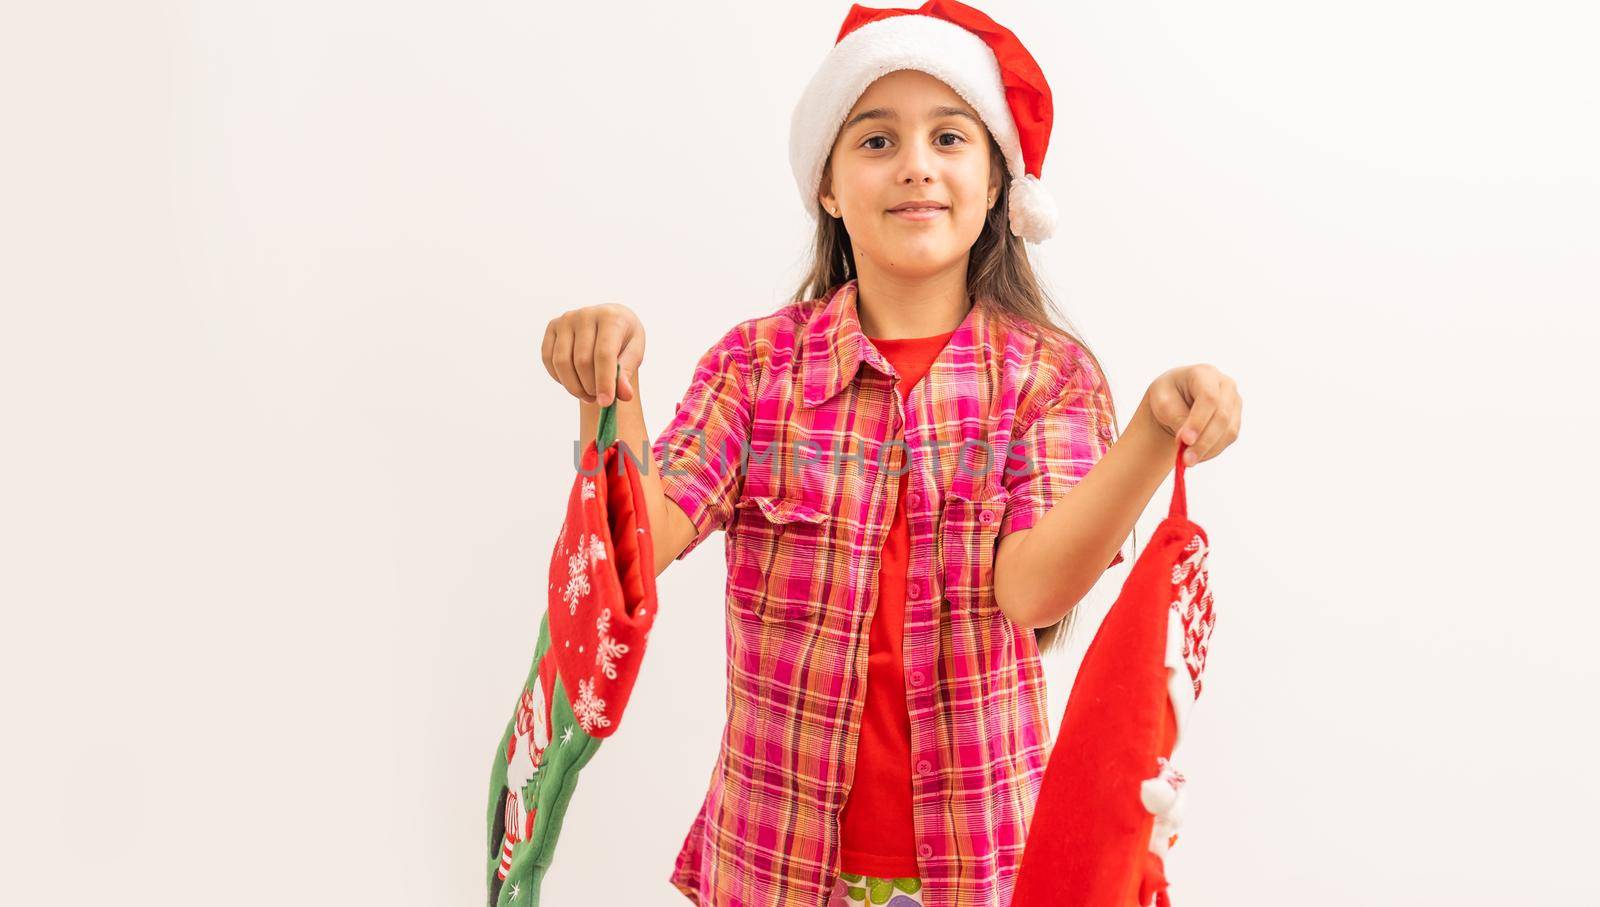 Cute smiling toddler girl in a red dress checking her Christmas stocking by Andelov13